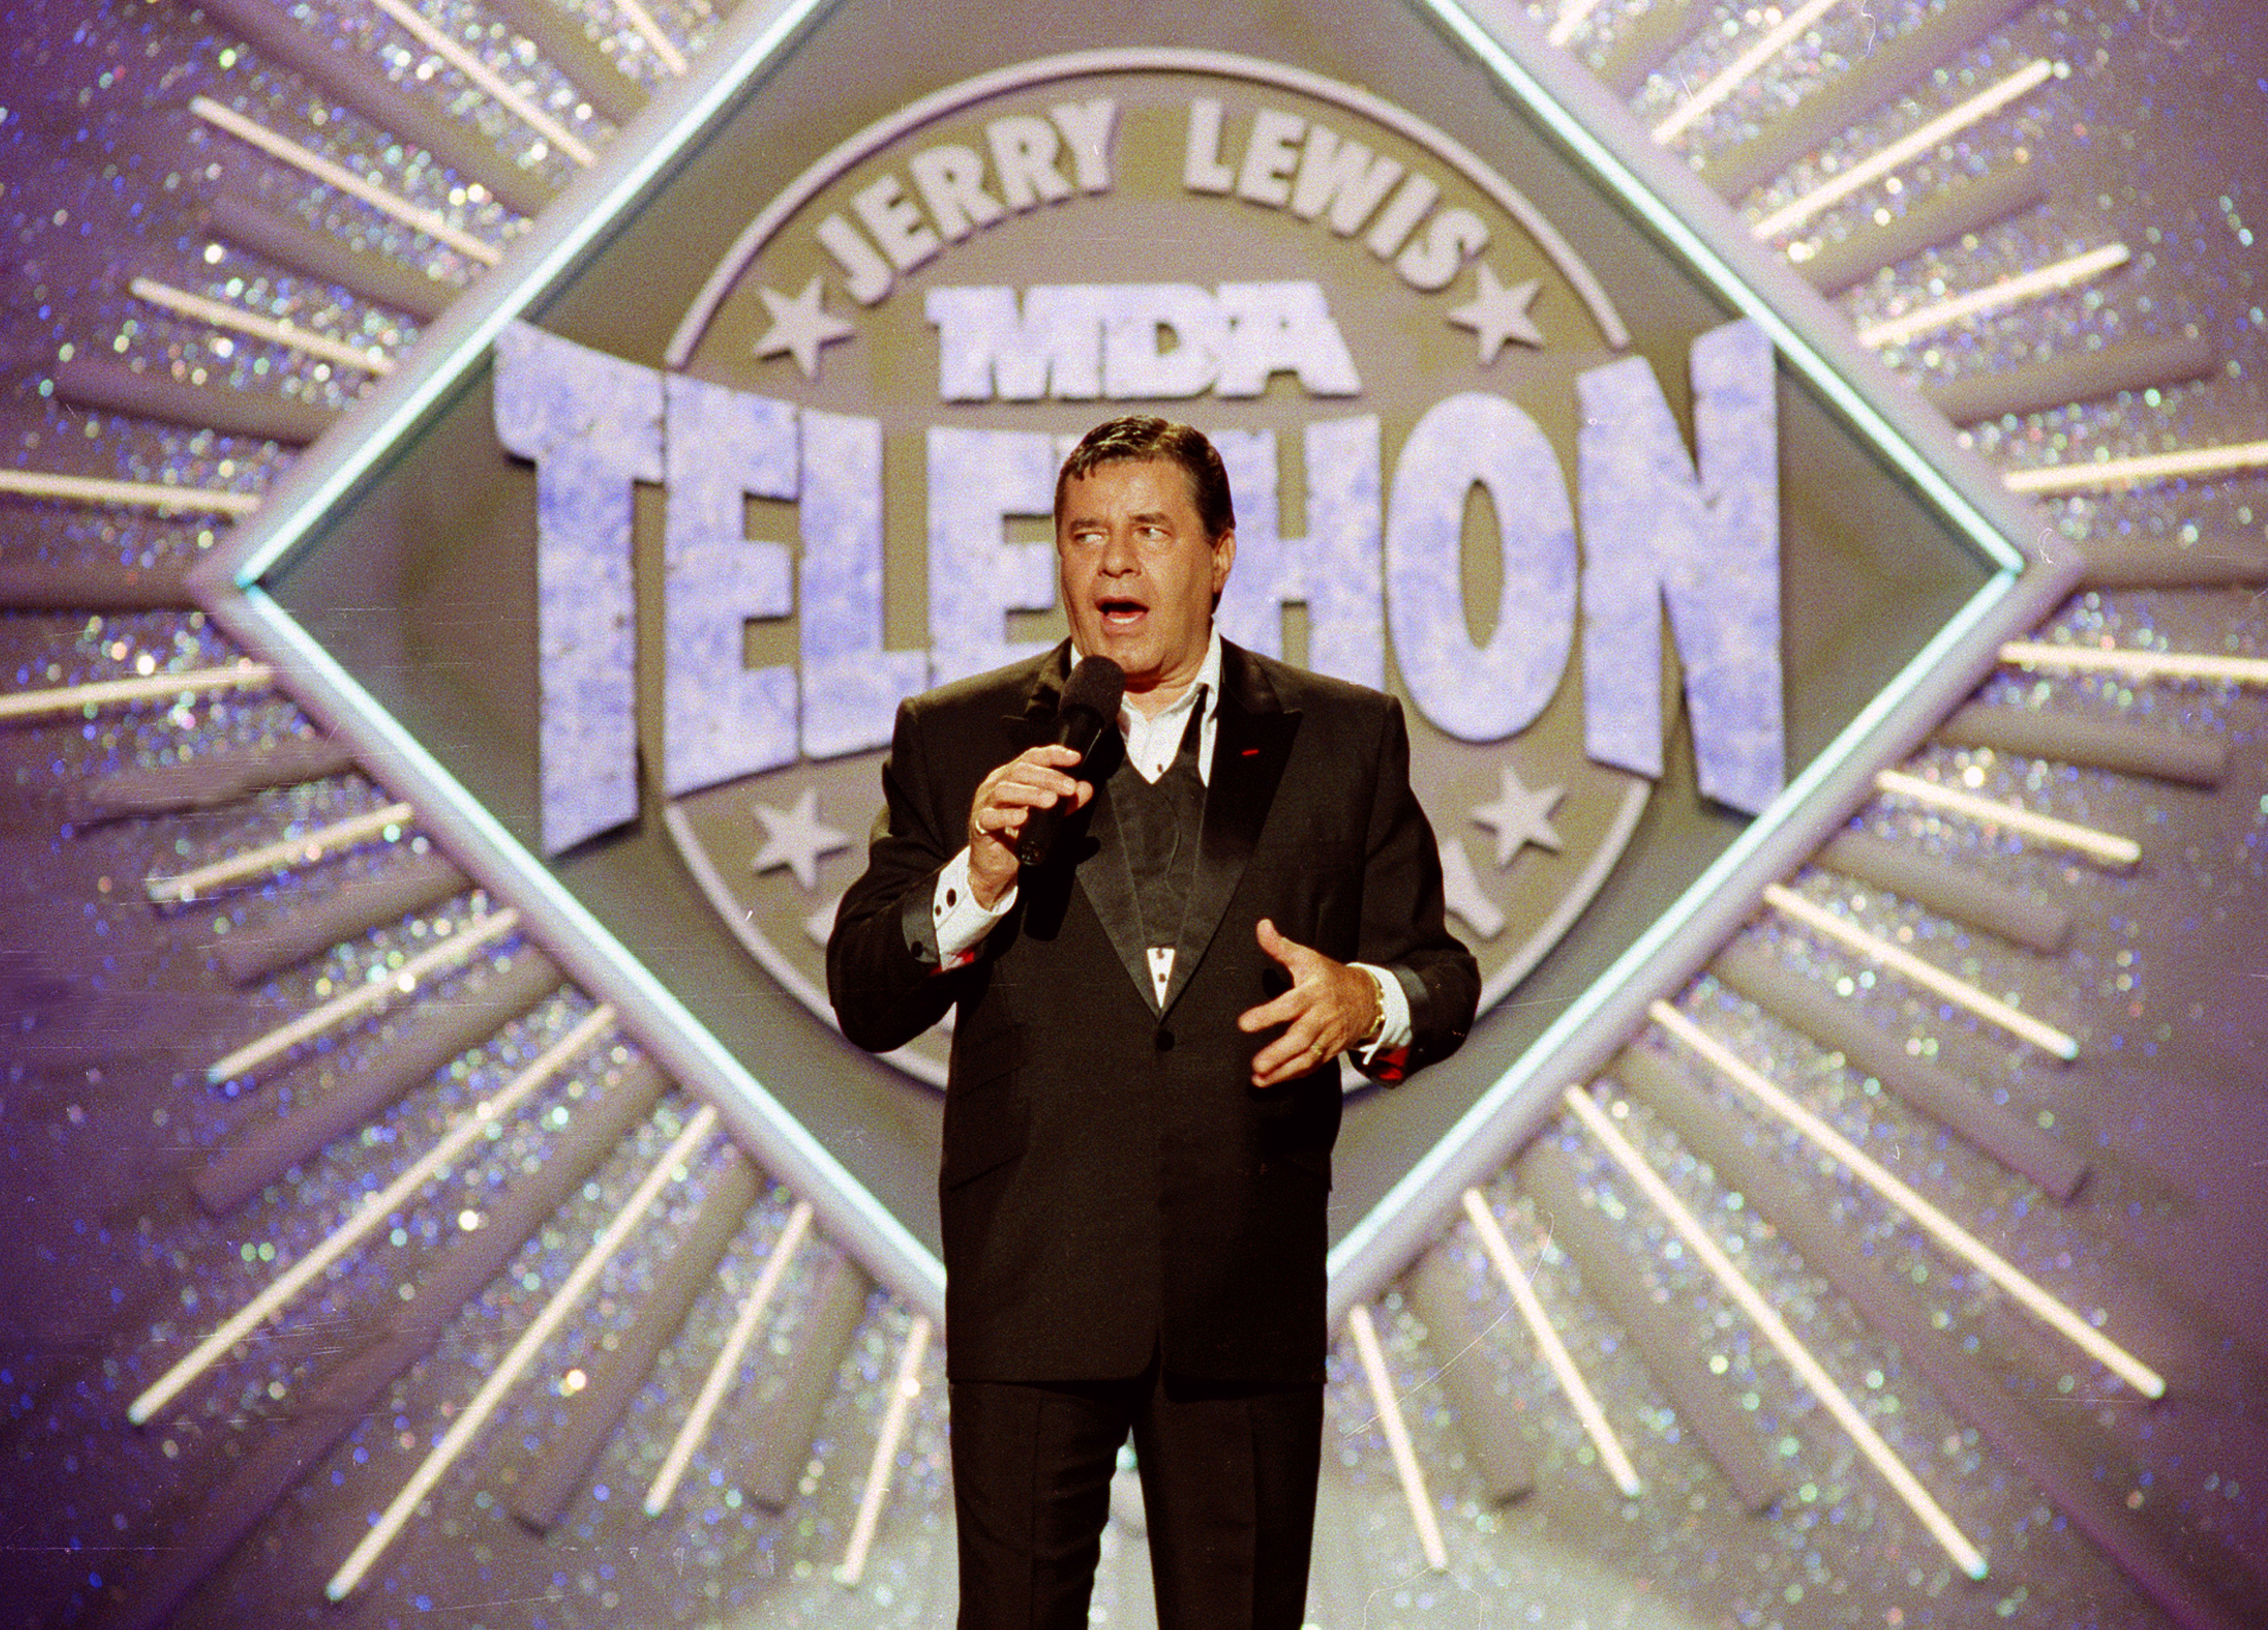 A YouTube channel features highlight performances from the Jerry Lewis MDA Labor Day Telethon.